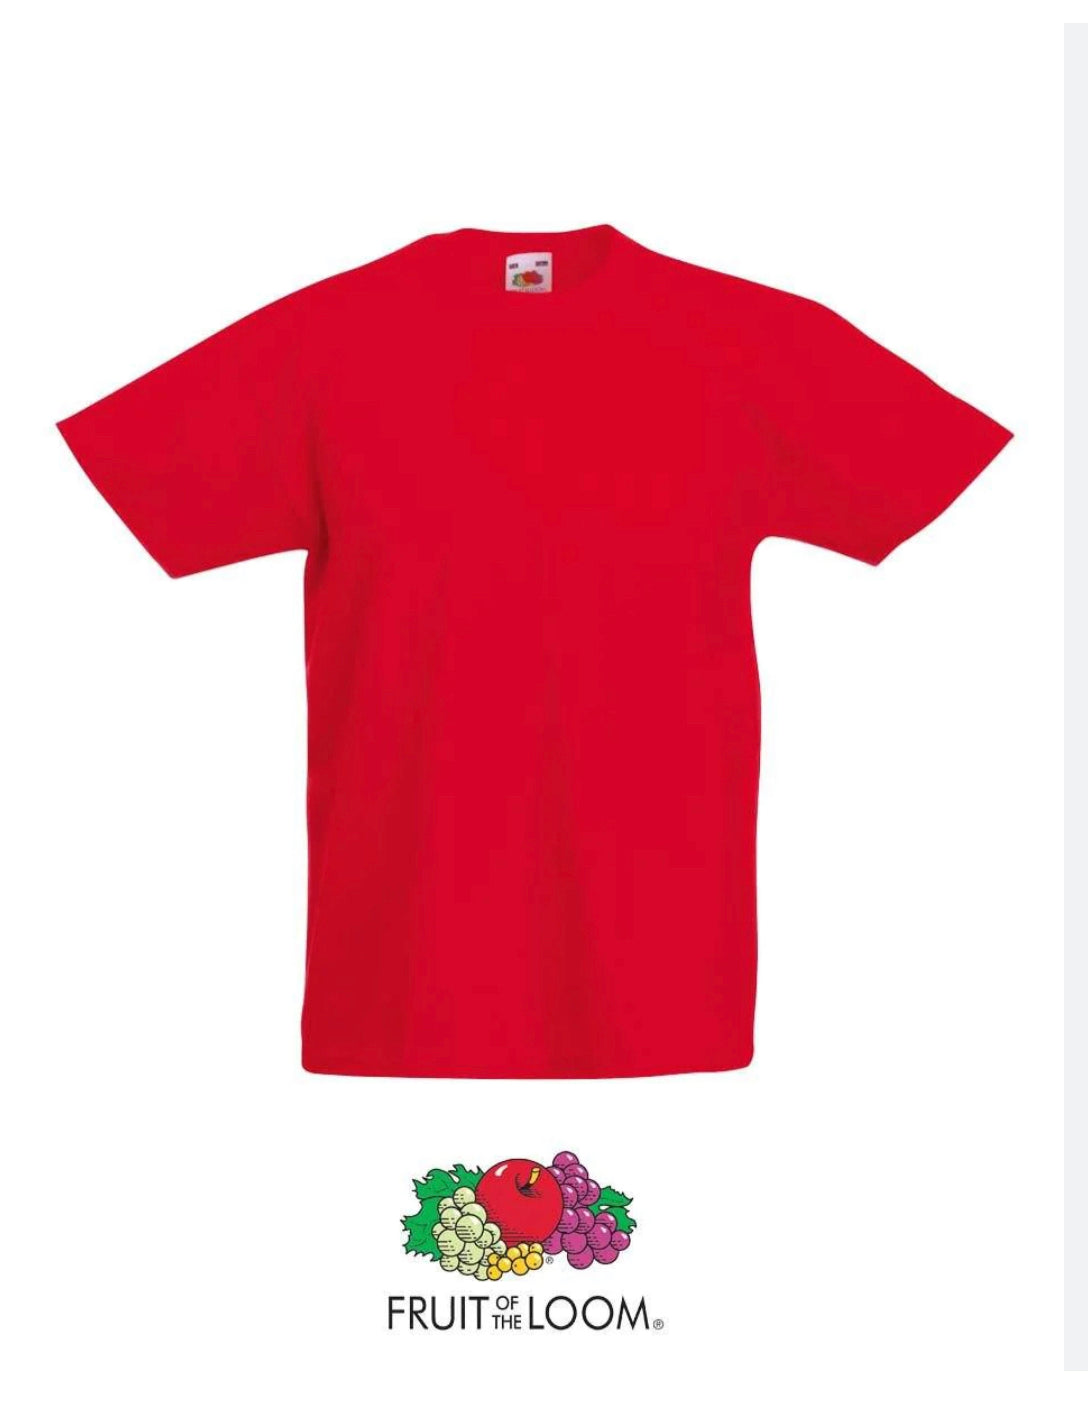 Fruit of the Loom Valueweight T.Shirt ..